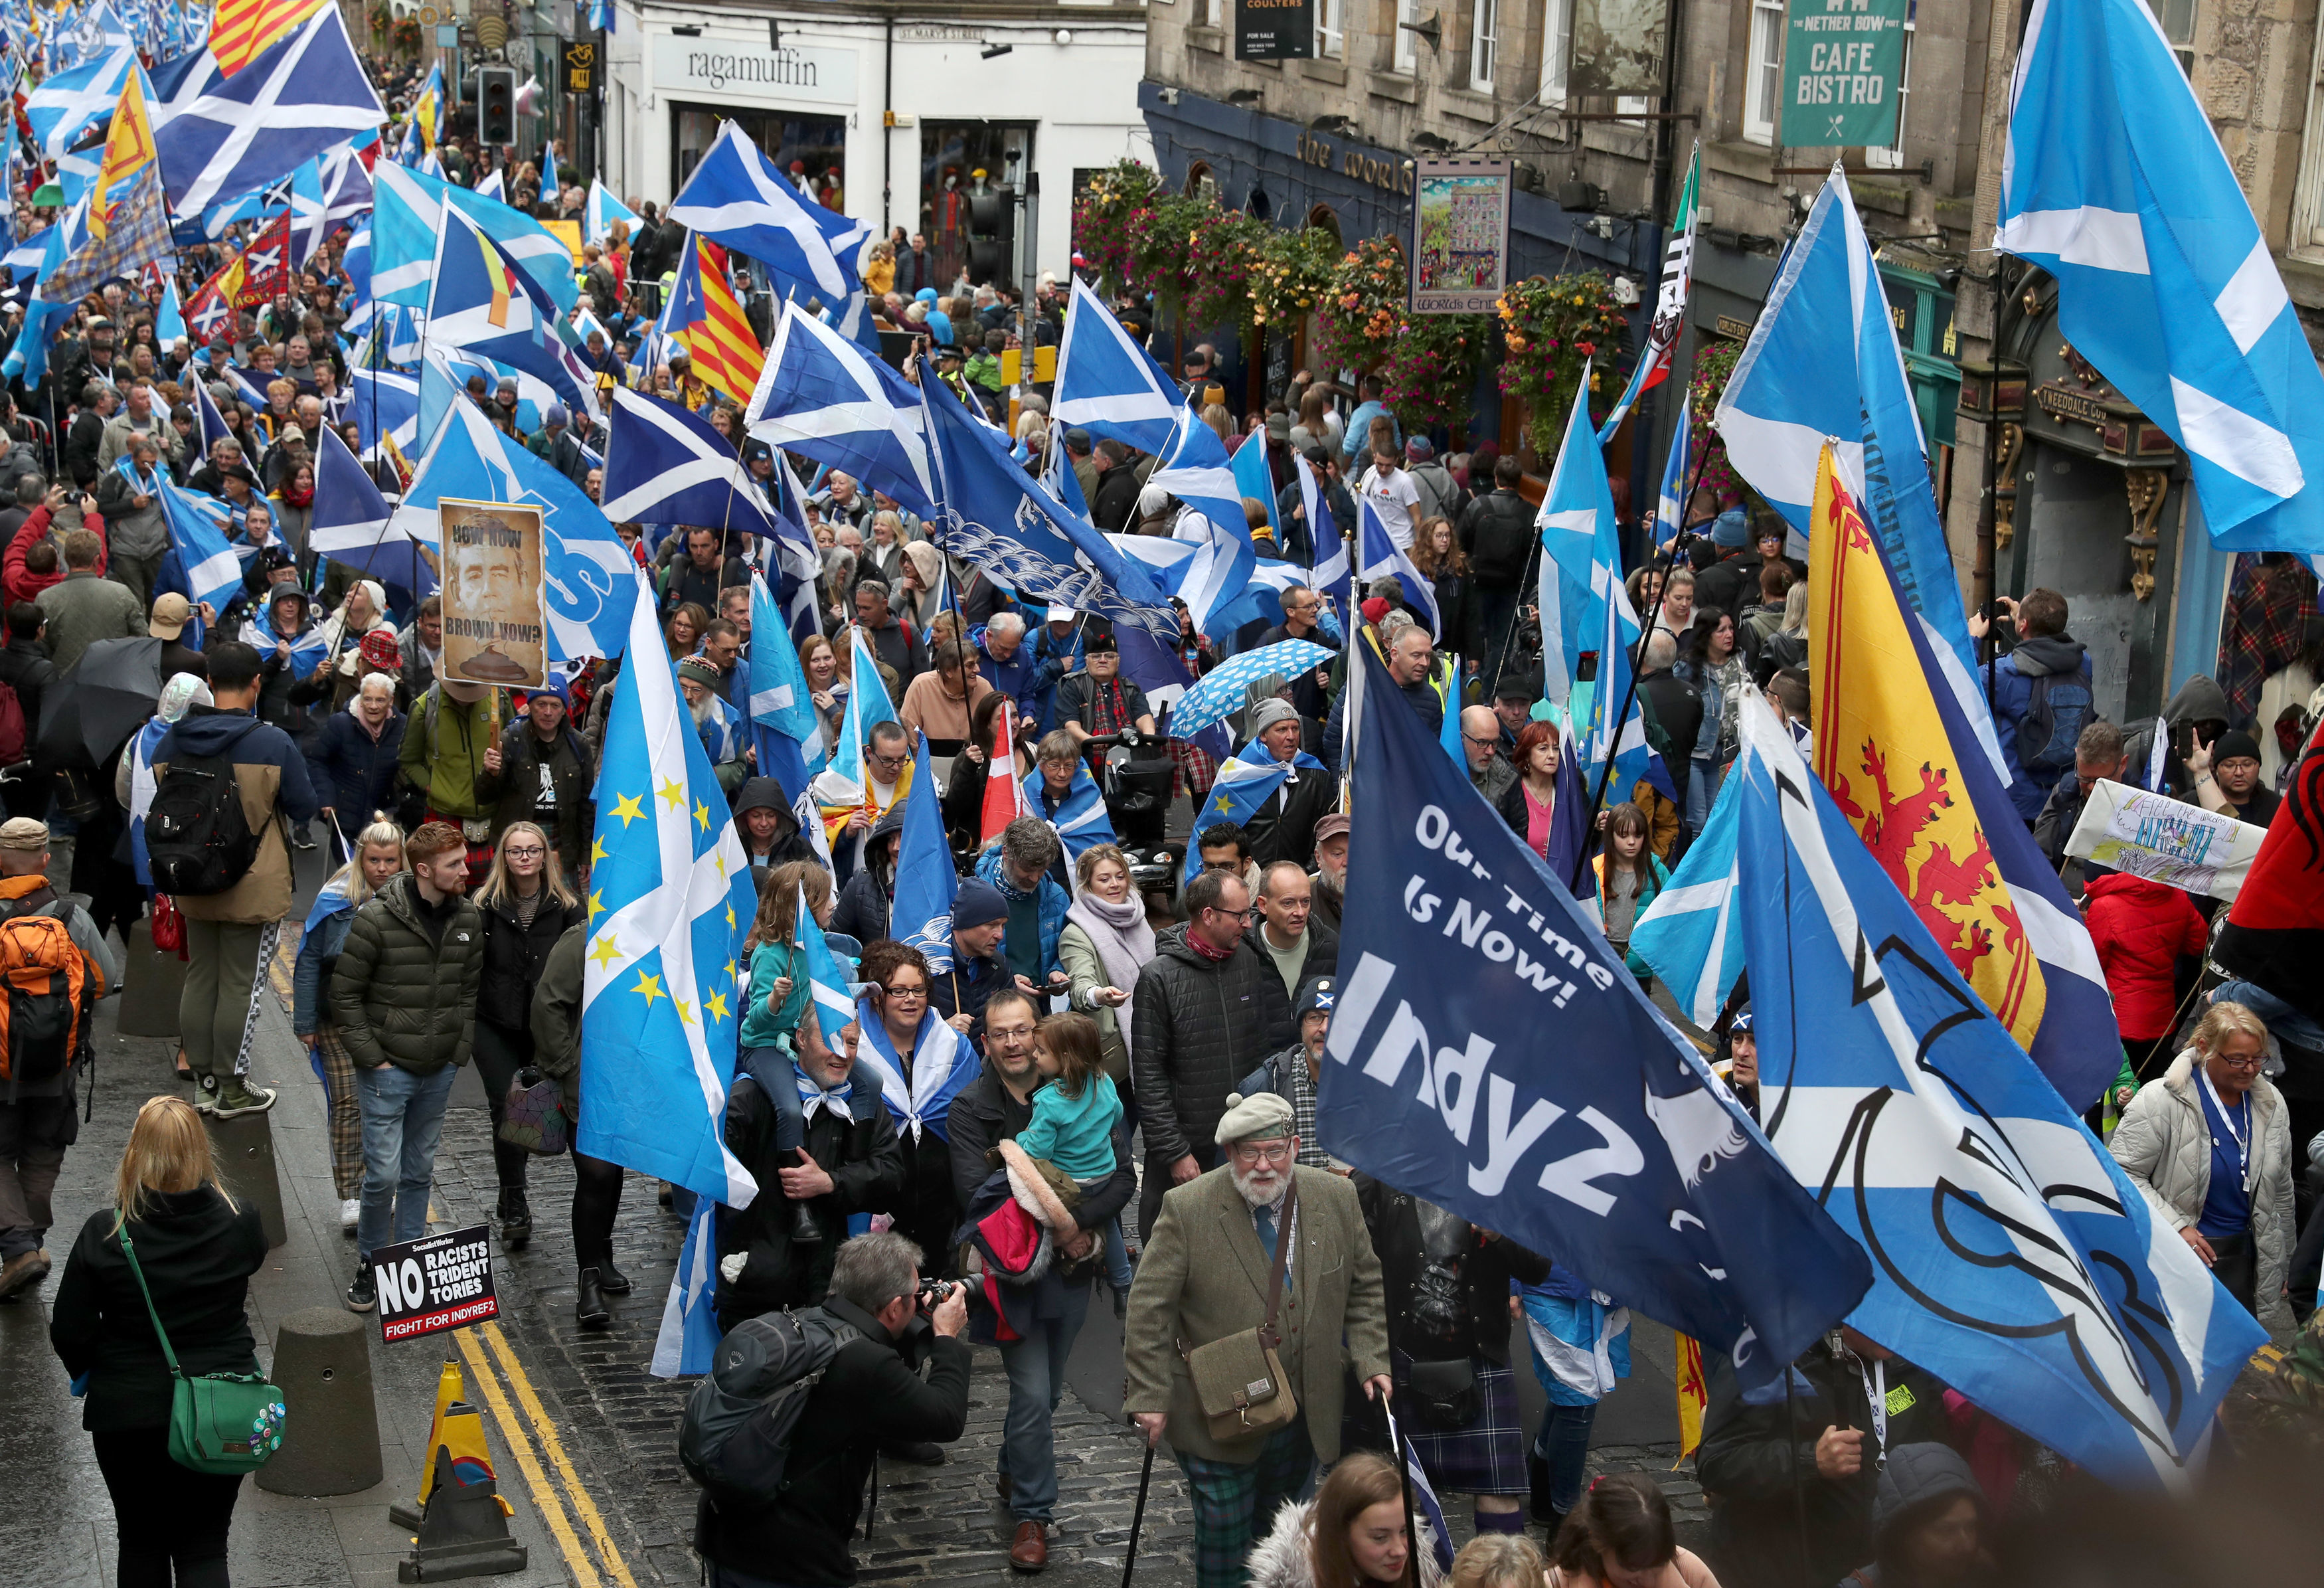 Marchers walking in support of Scottish independence.